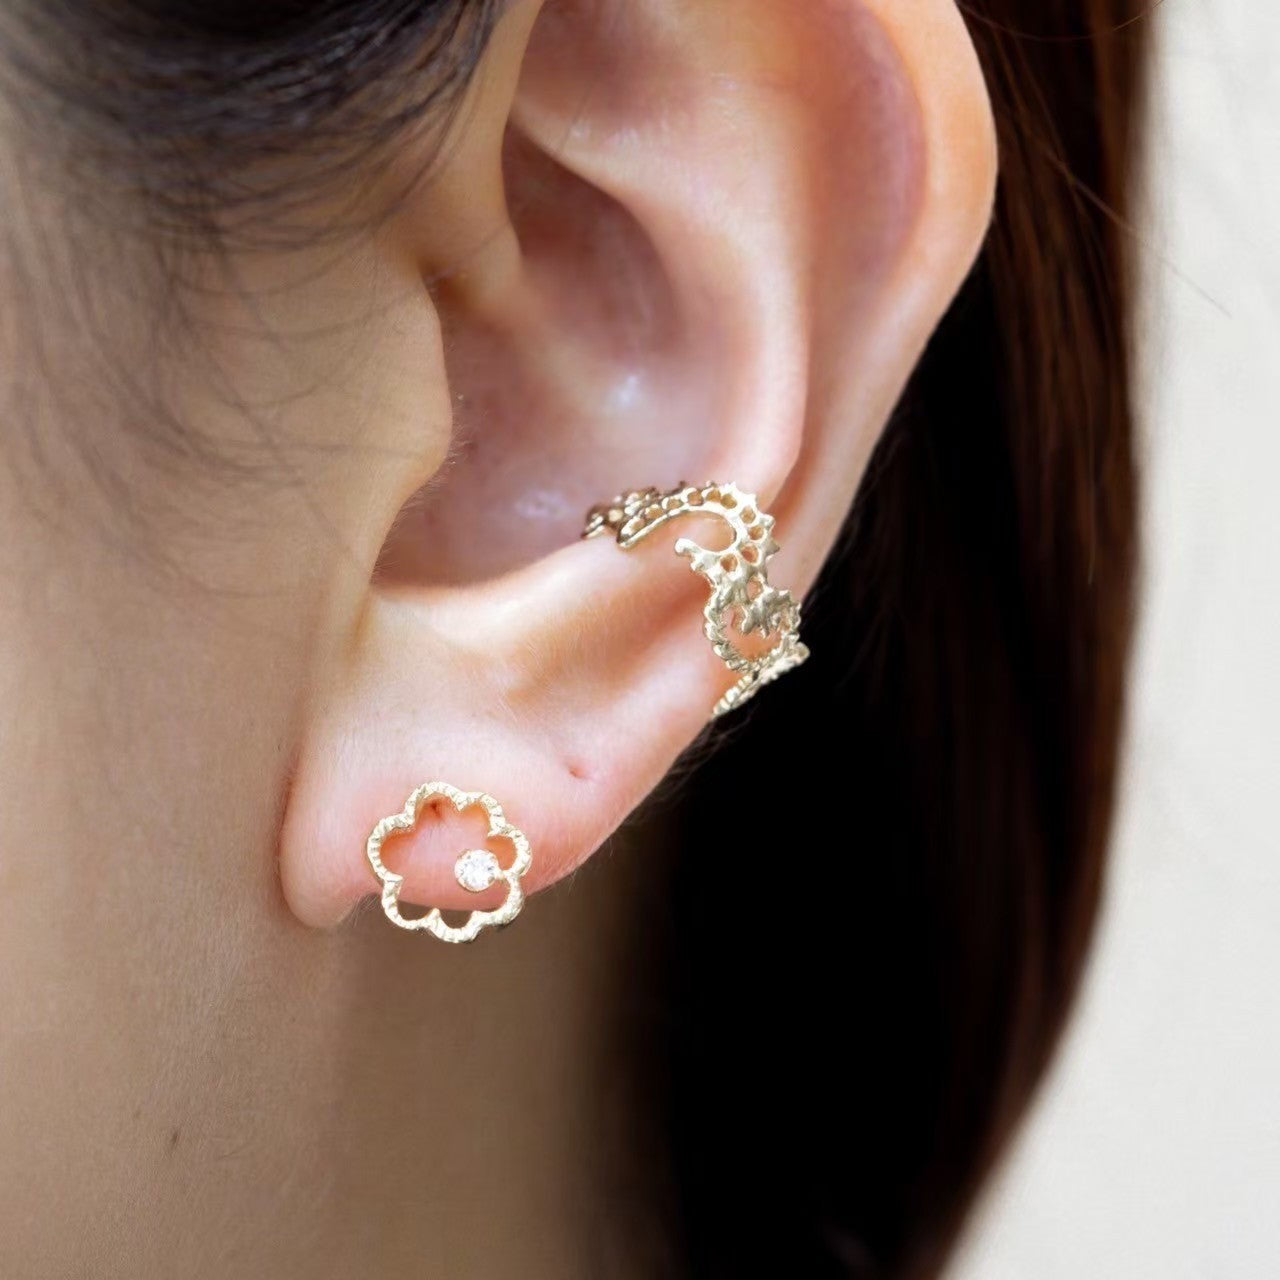 Swatow Ear Cuff S/K10 Pink Gold